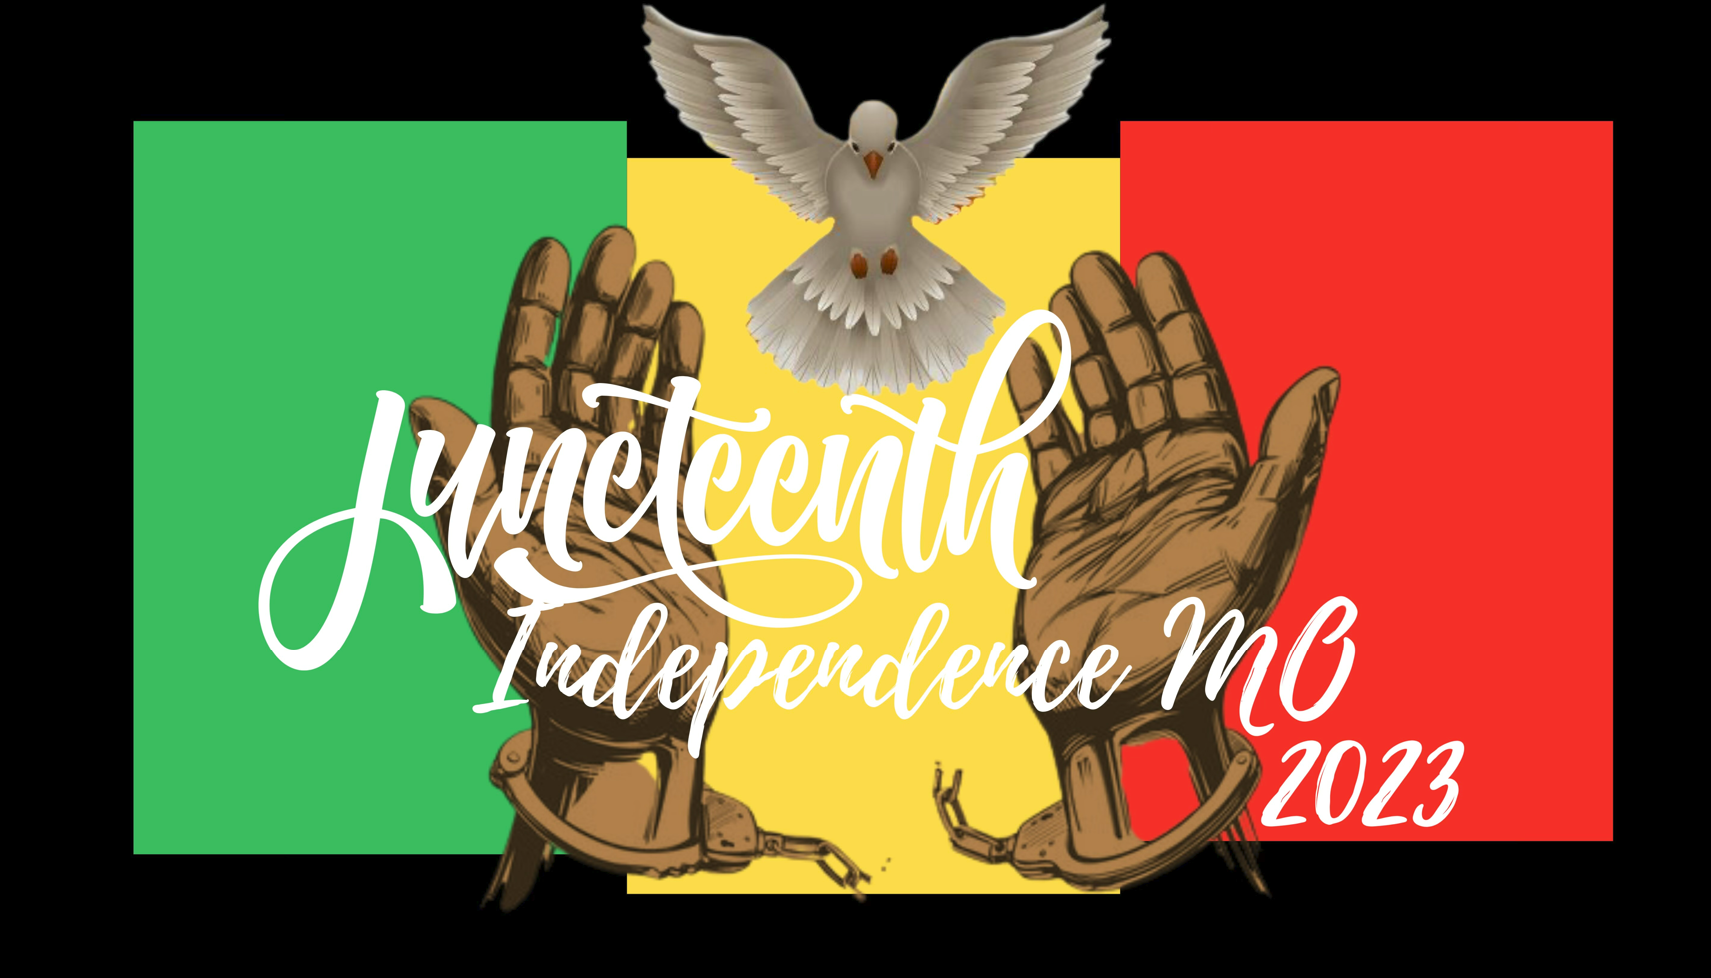 Juneteenth Independence Mo 2023. Image of African American Hands breaking from chains and releasing a dove with blocks of green, yellow, and red behind them. 